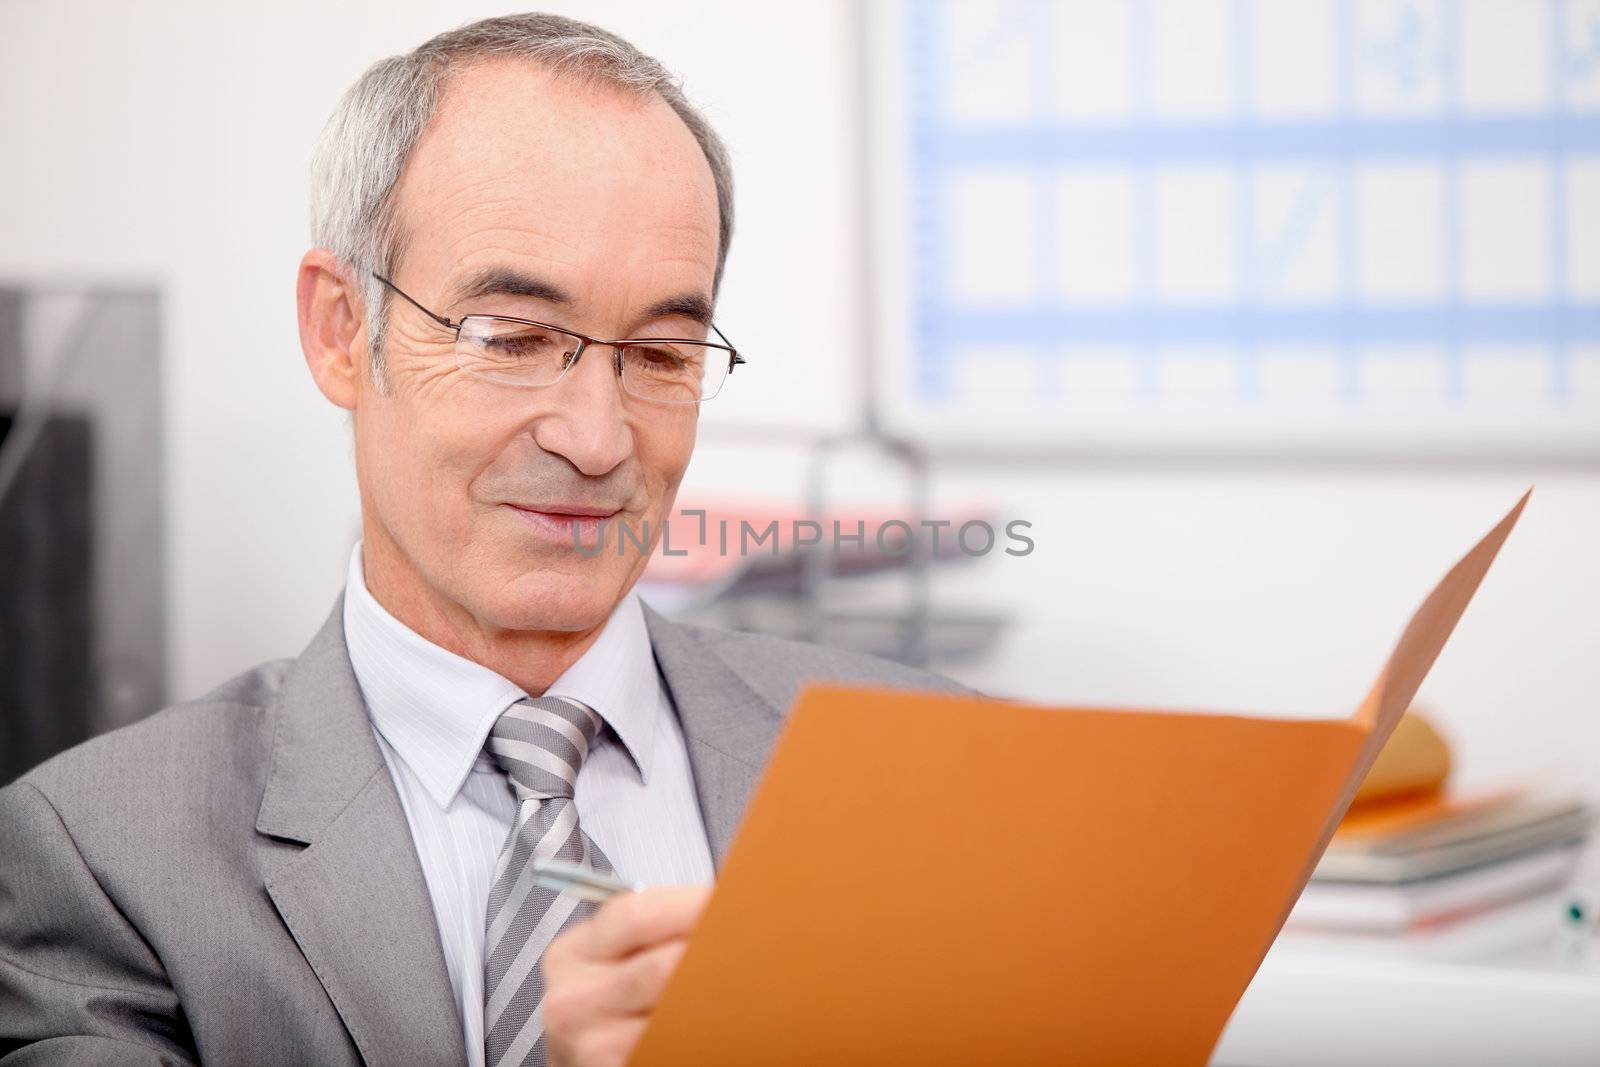 Older businessman writing in a file